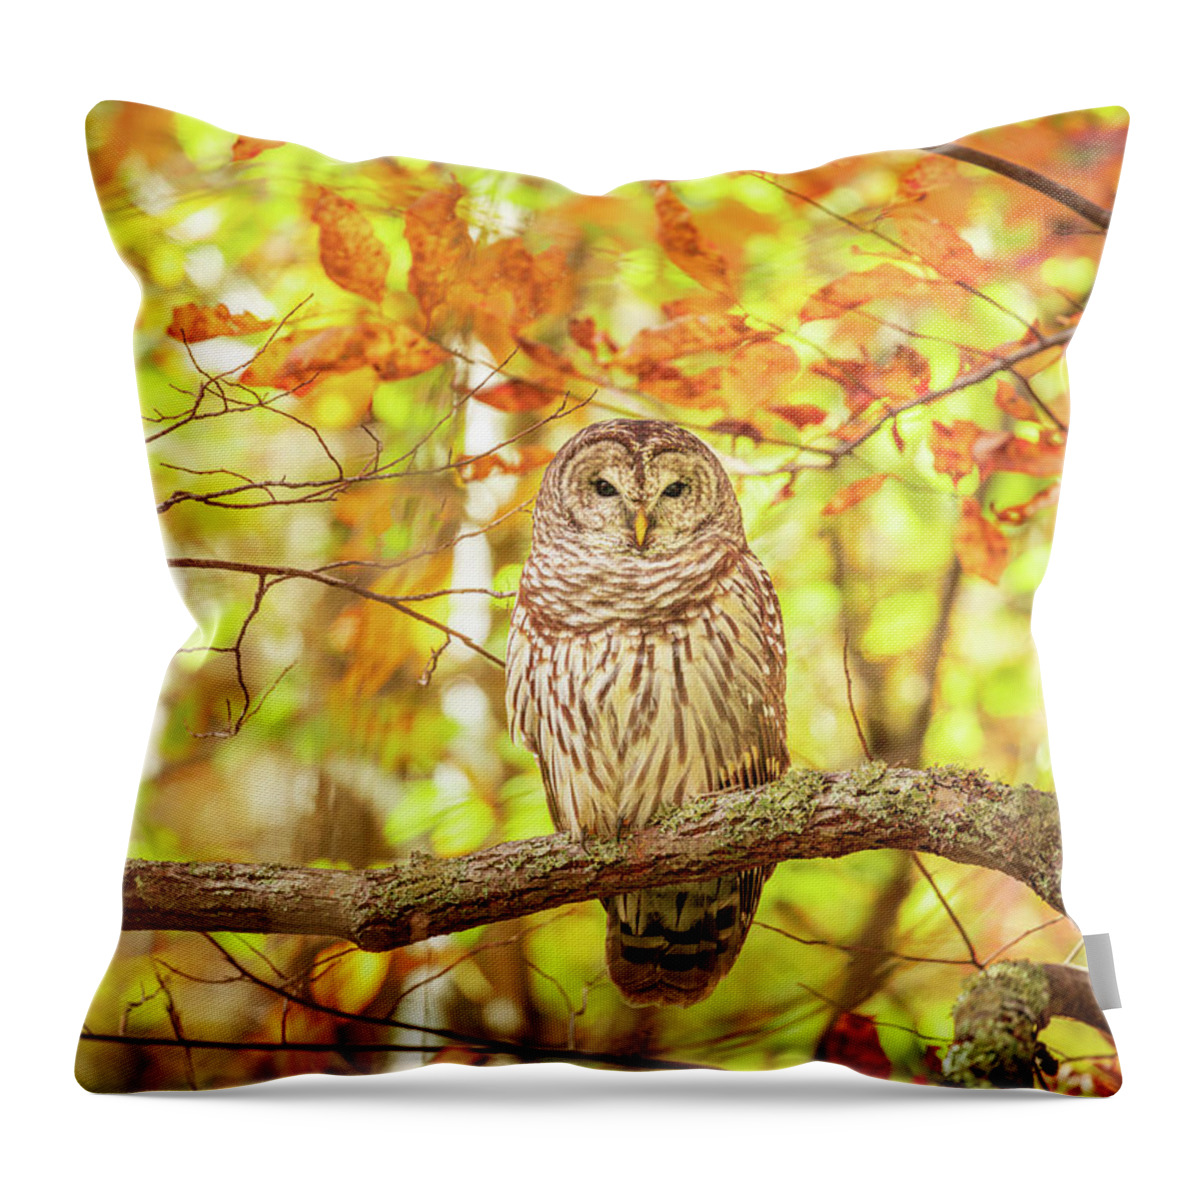 Barred Owl Throw Pillow featuring the photograph Barred Owl In Autumn Natchez Trace MS by Jordan Hill